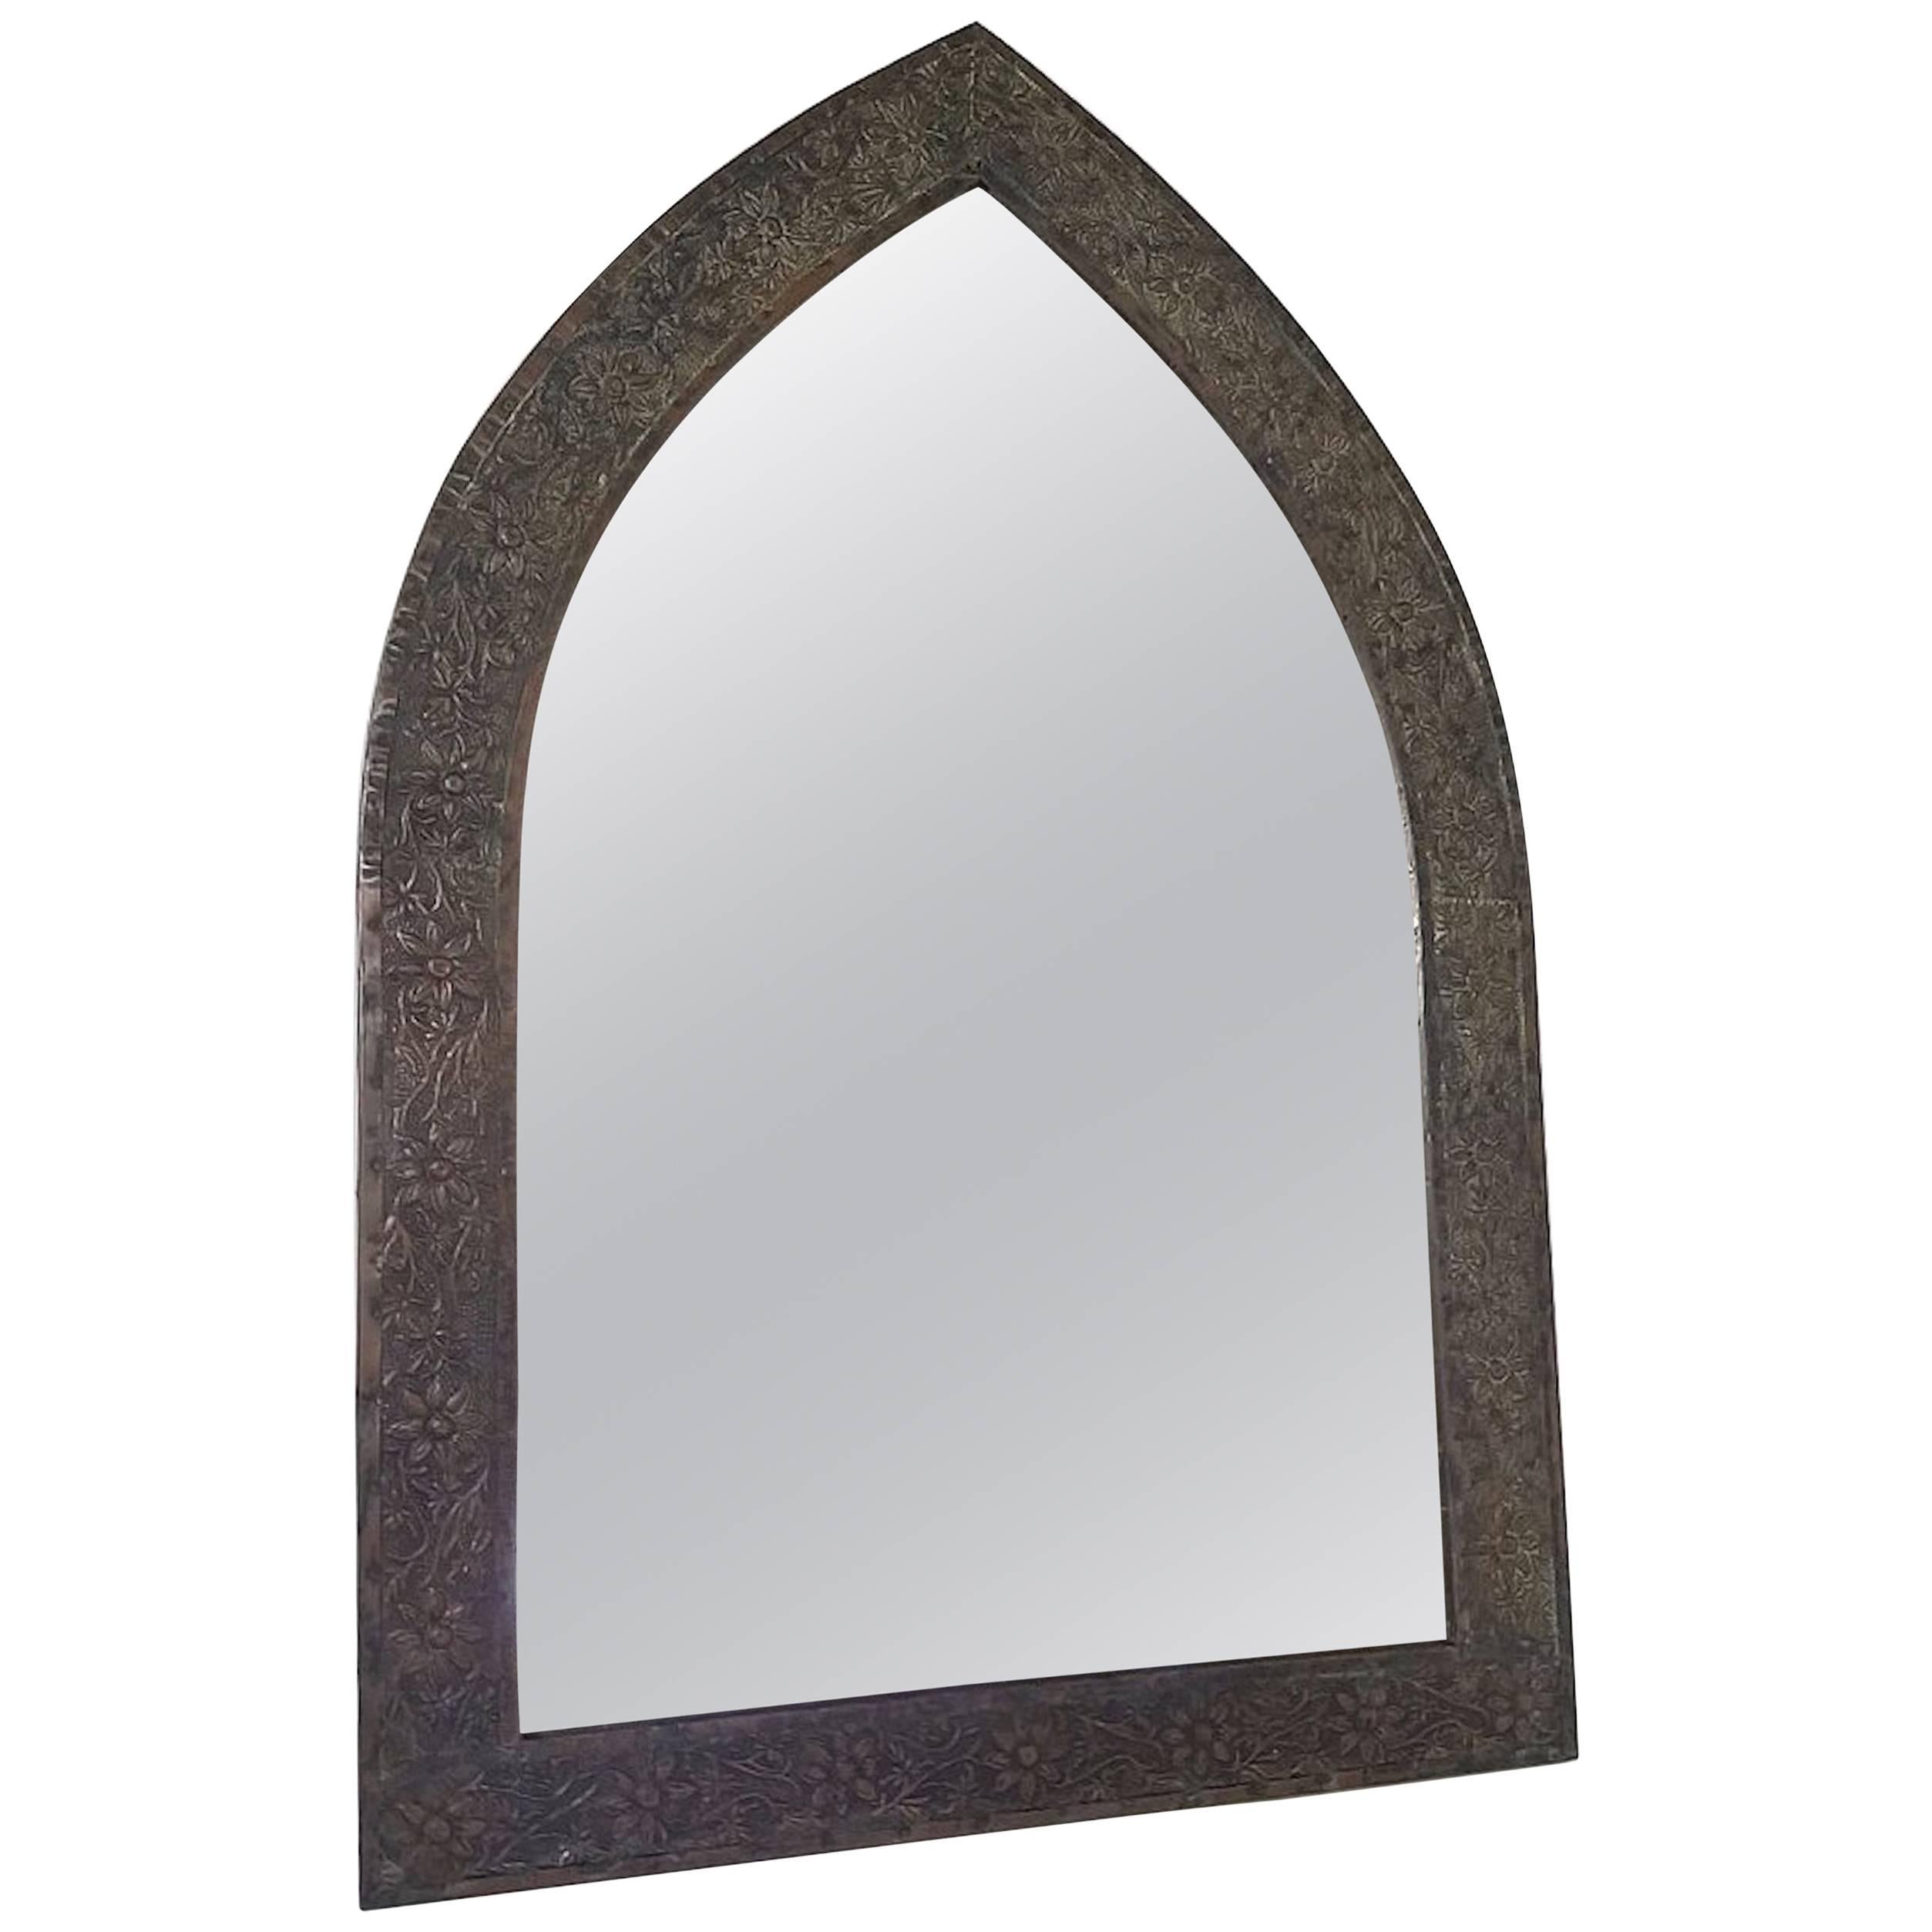 Triangular Patinated Tole Gothic Style Mirror For Sale